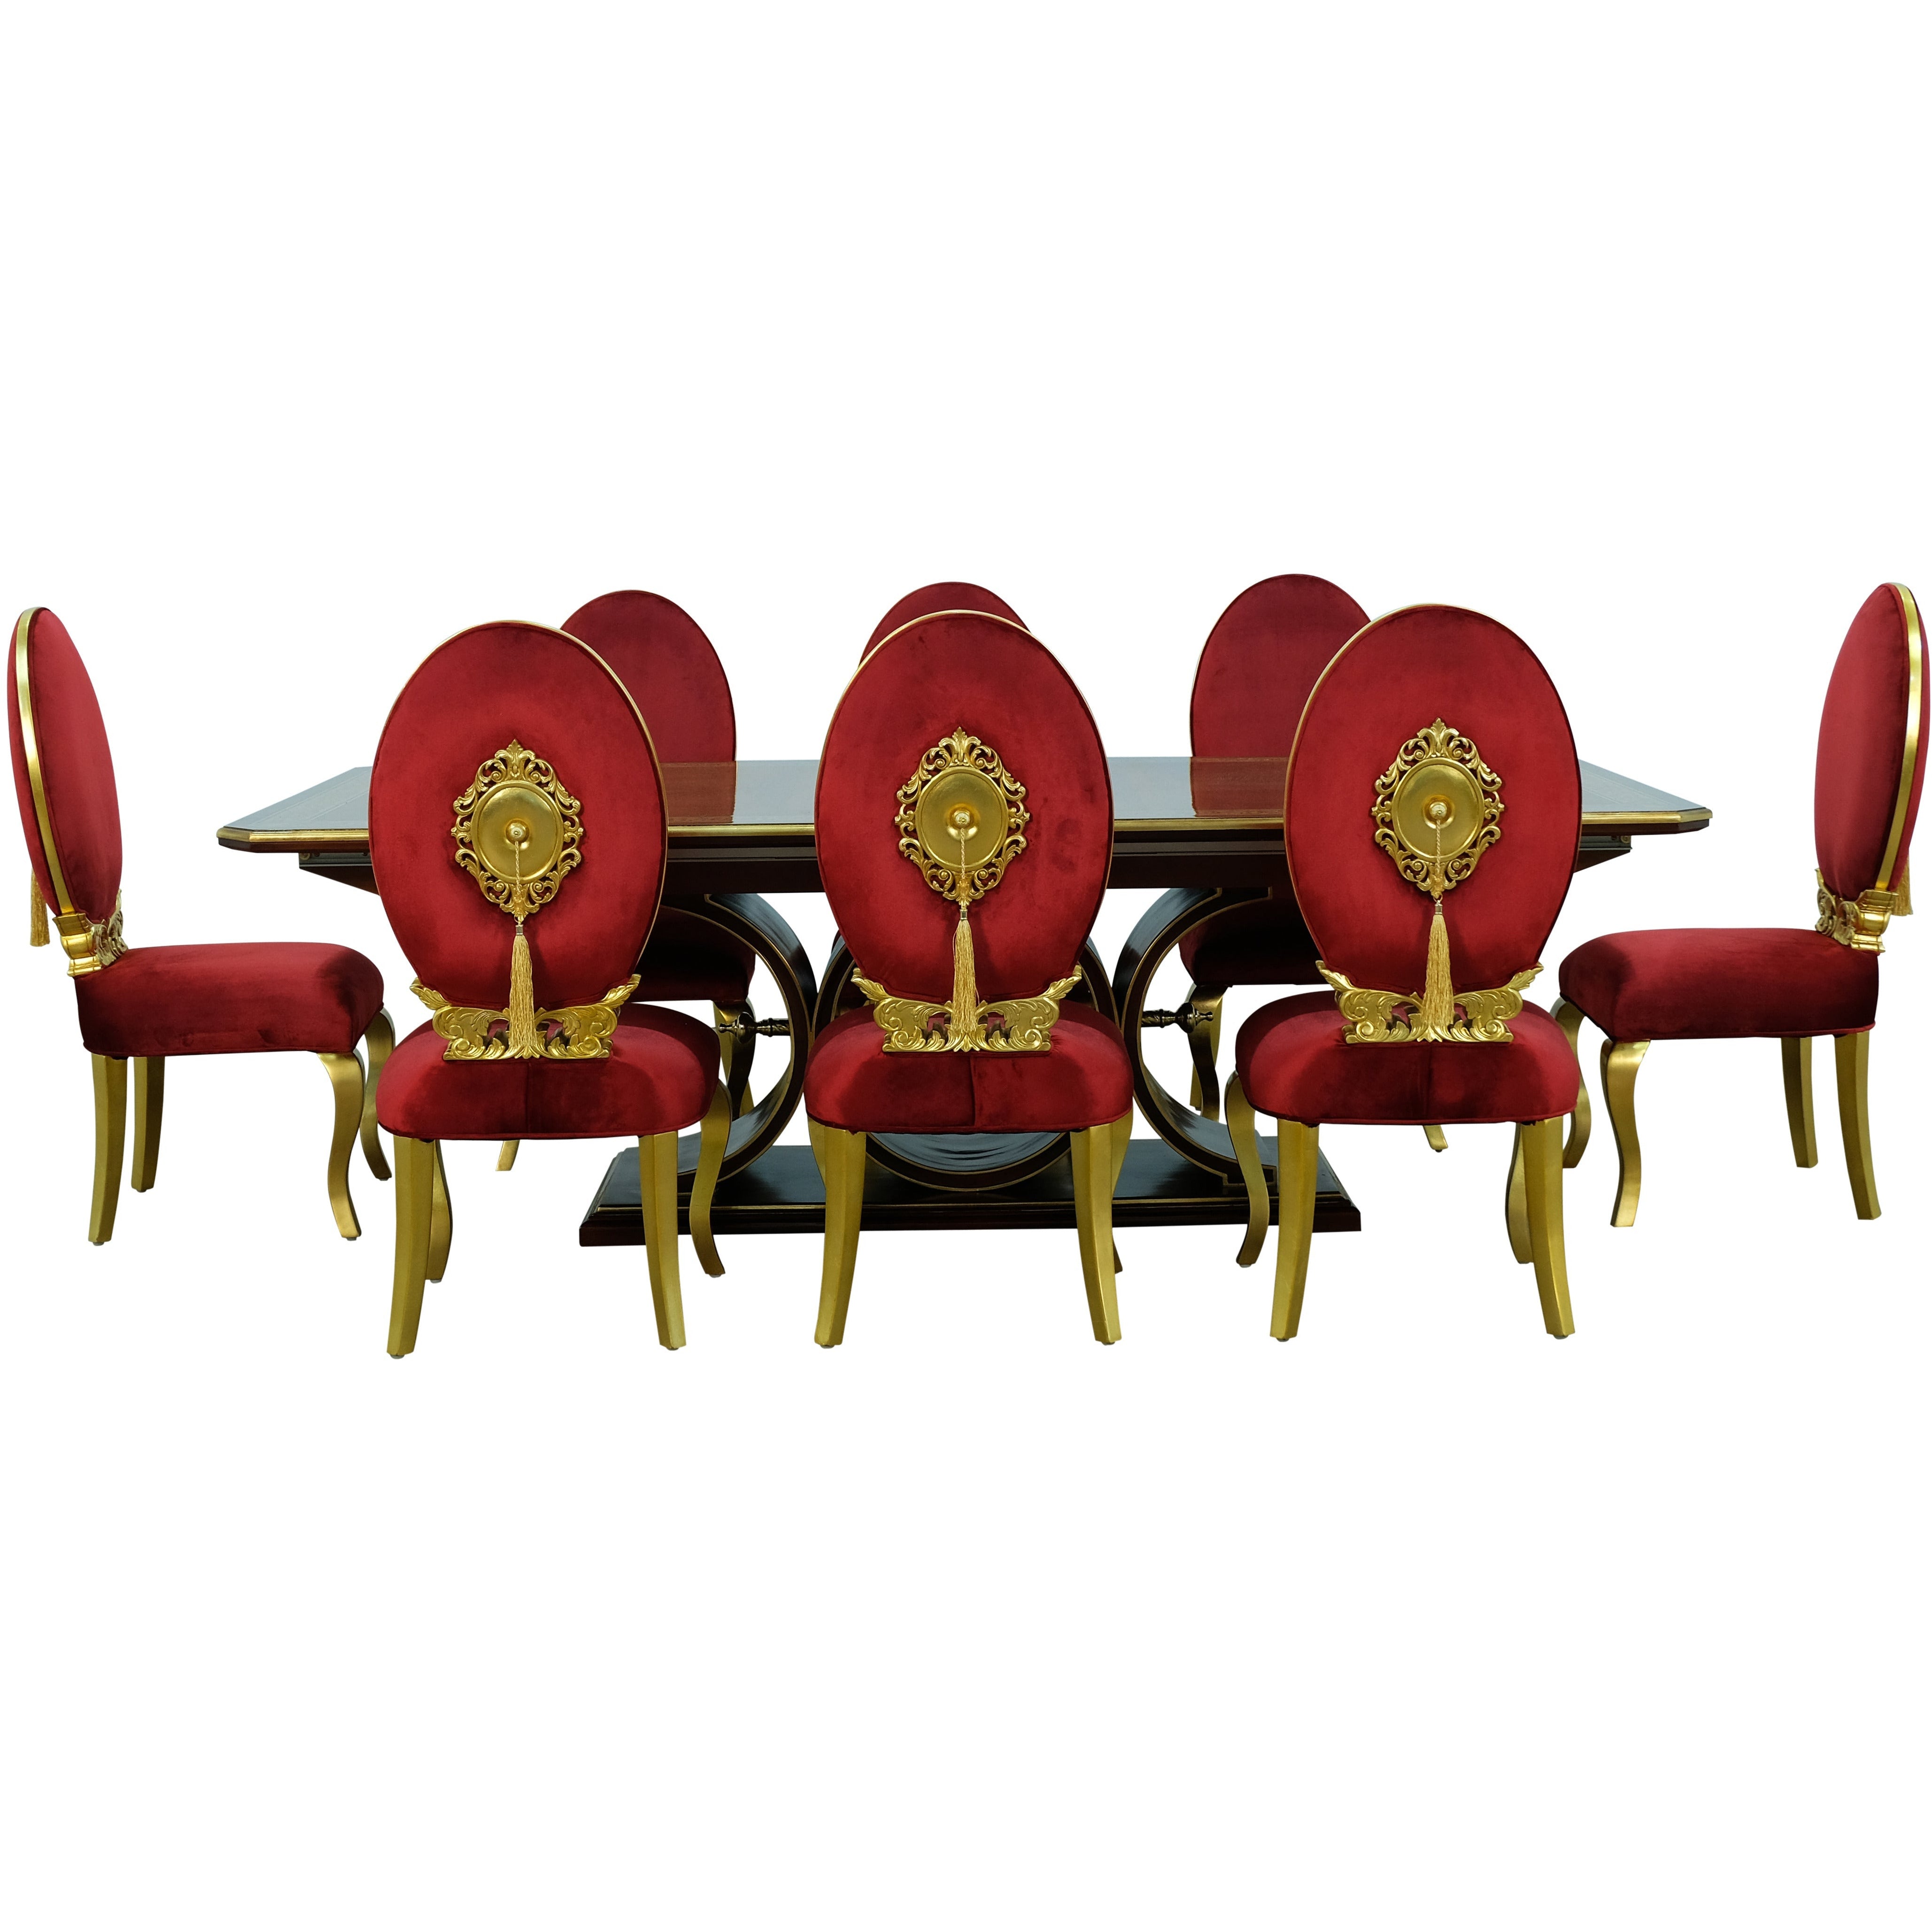 European Furniture - Rosella 9 Piece Dining Room Set in Havana With Deco Gold Leaf - 44697-9SET - New Star Living